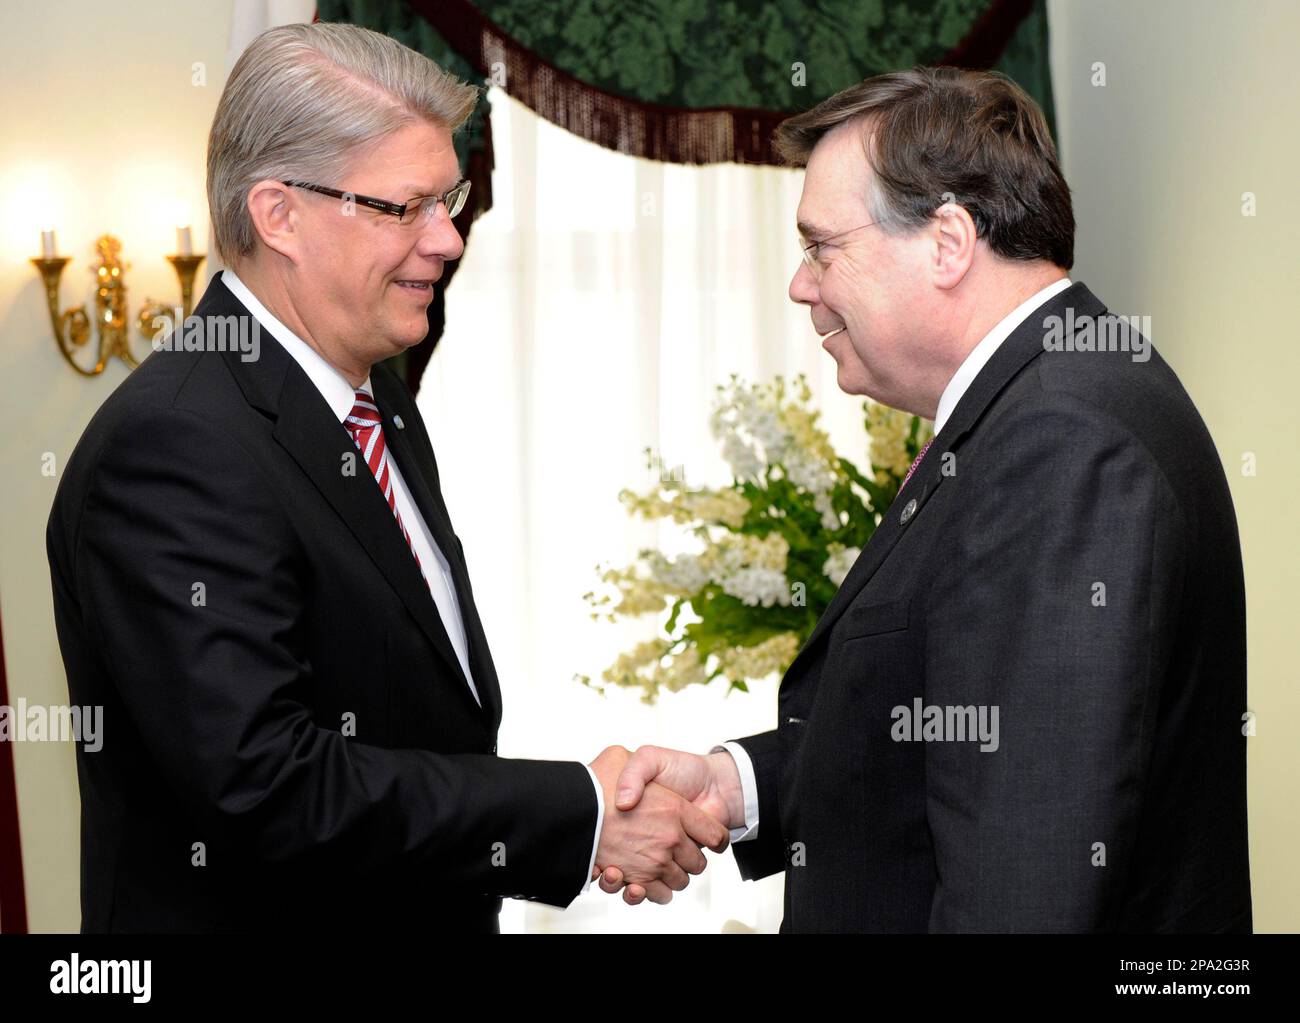 Latvia's President Valdis Zatlers, left, shake hands, with Iceland's Prime Minister Geir Haarde during a a Summit of the Heads of Government Council of the Baltic Sea States in the House of Blackheads in Riga ,Latvia,Wednesday, June 4, 2008. (AP Photo/Roman Koksarov) Stock Photo